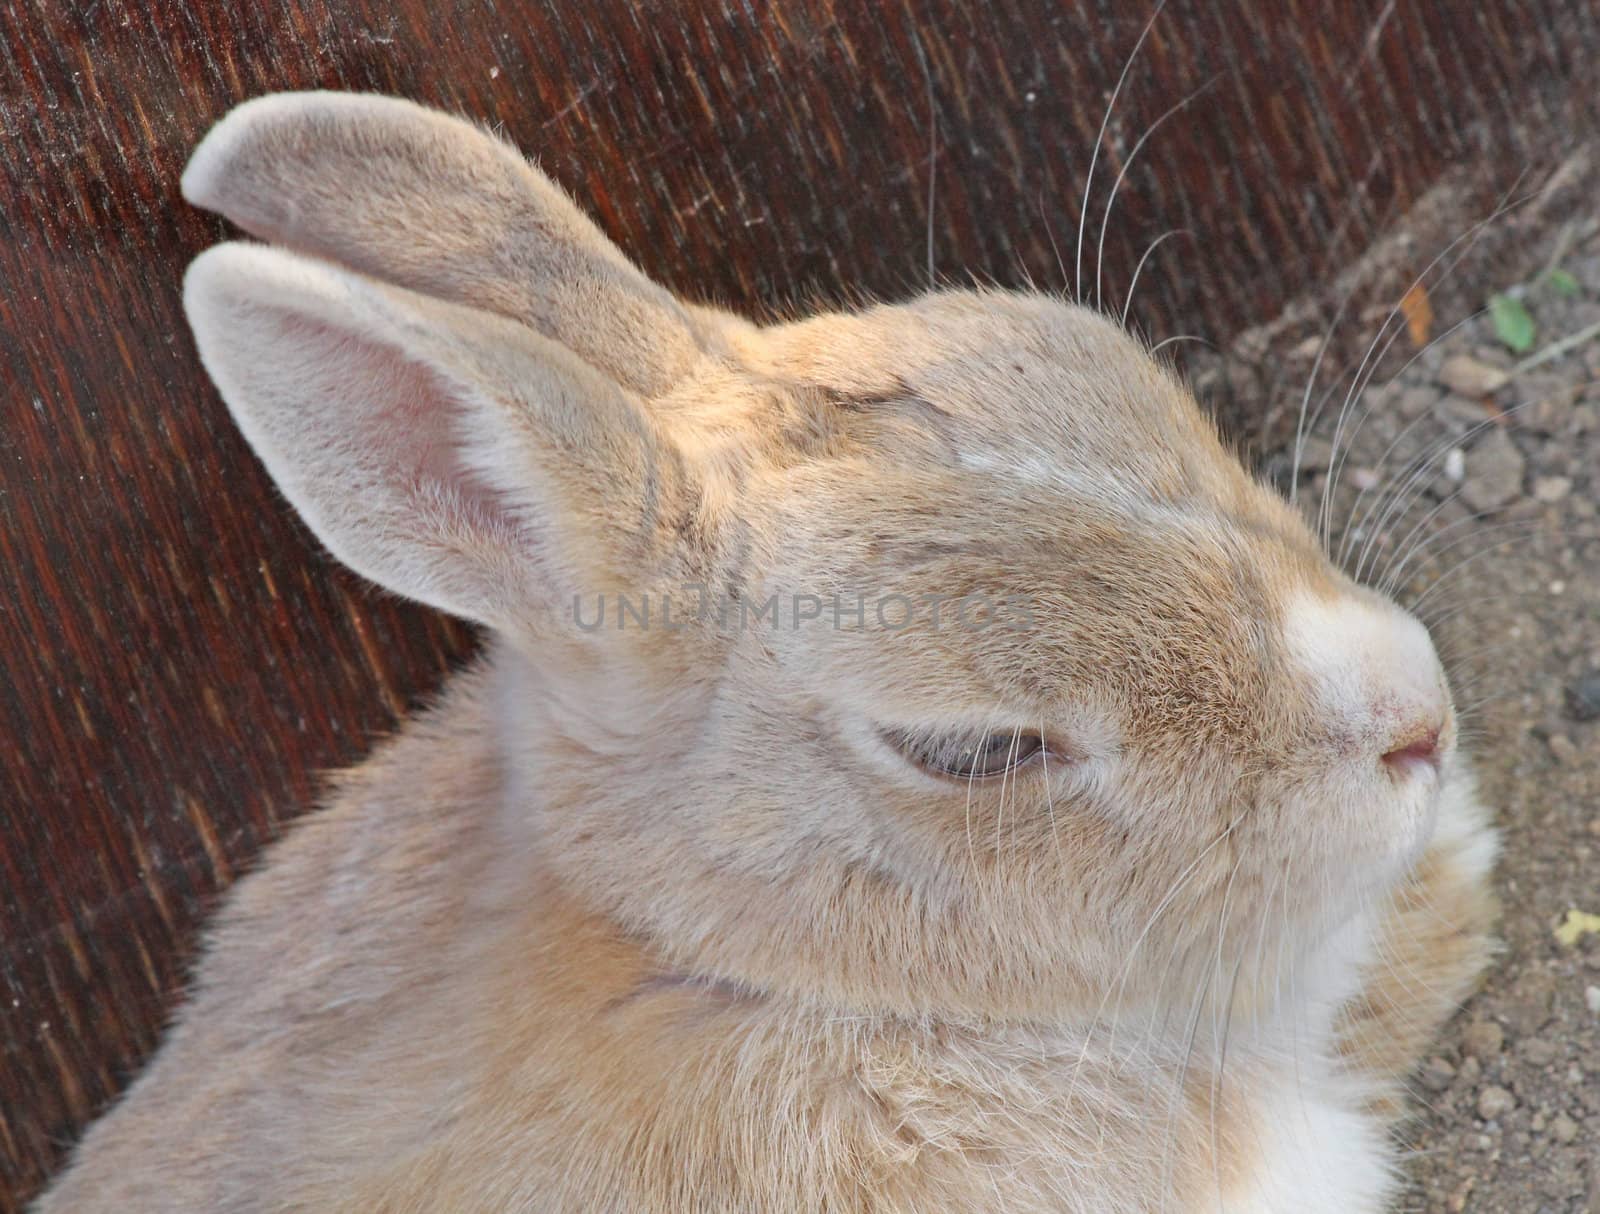 Close up of the rabbit's head.